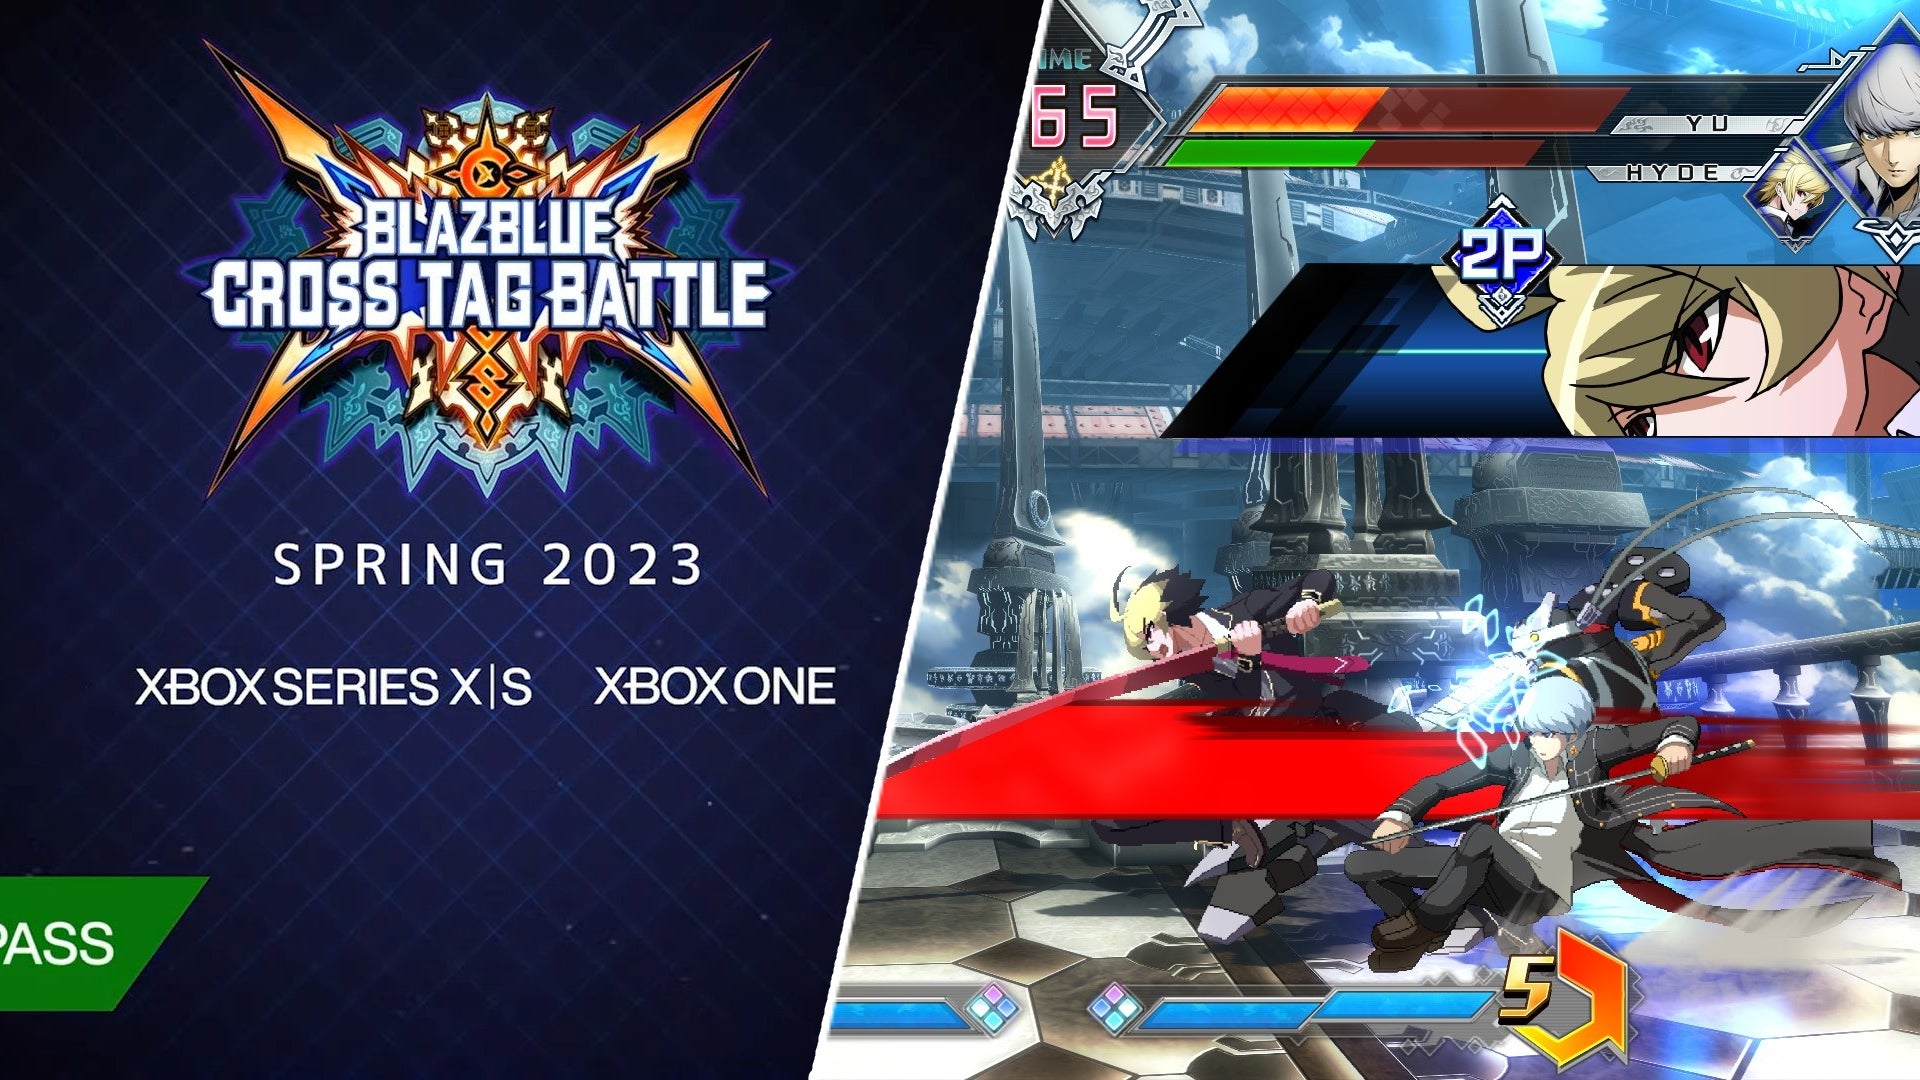 Split header for Blazblue Cross Tag gameplay and game pass announcement